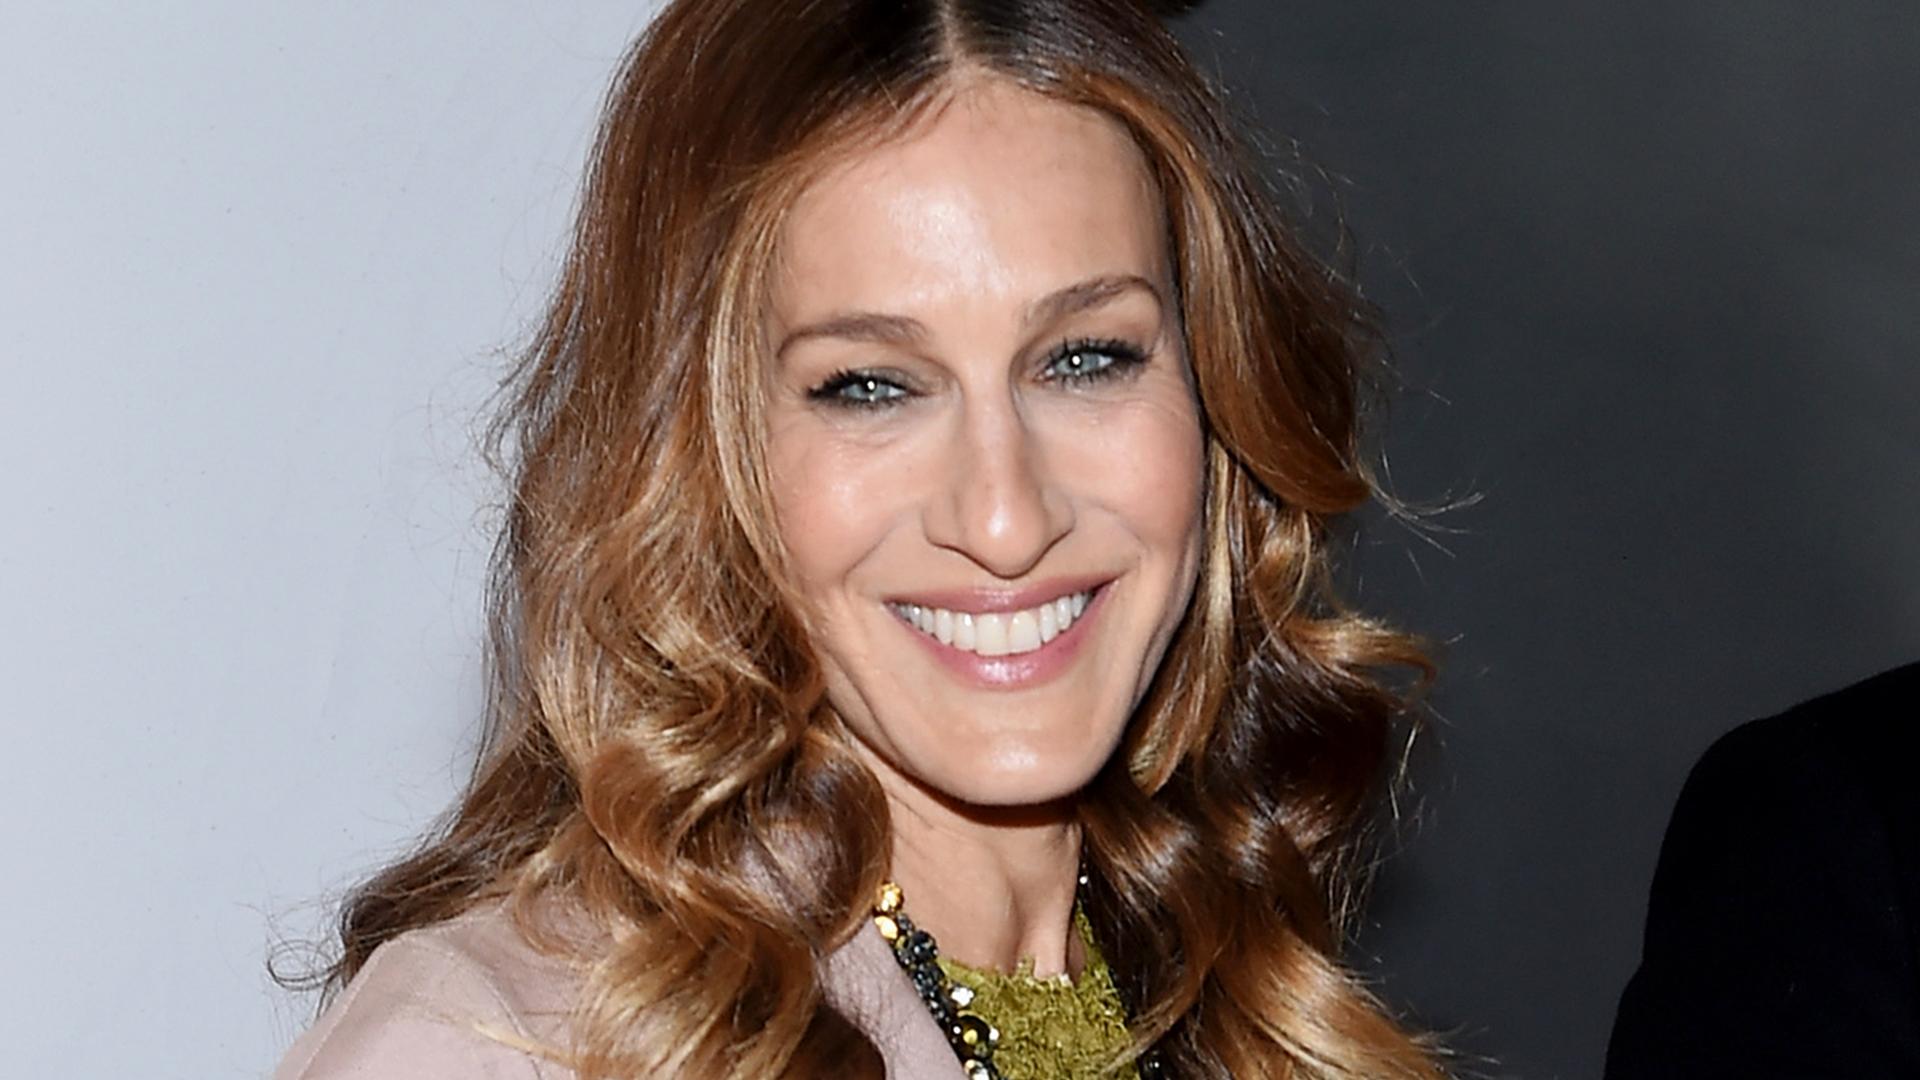 Things You Did Not Know About Sarah Jessica Parker